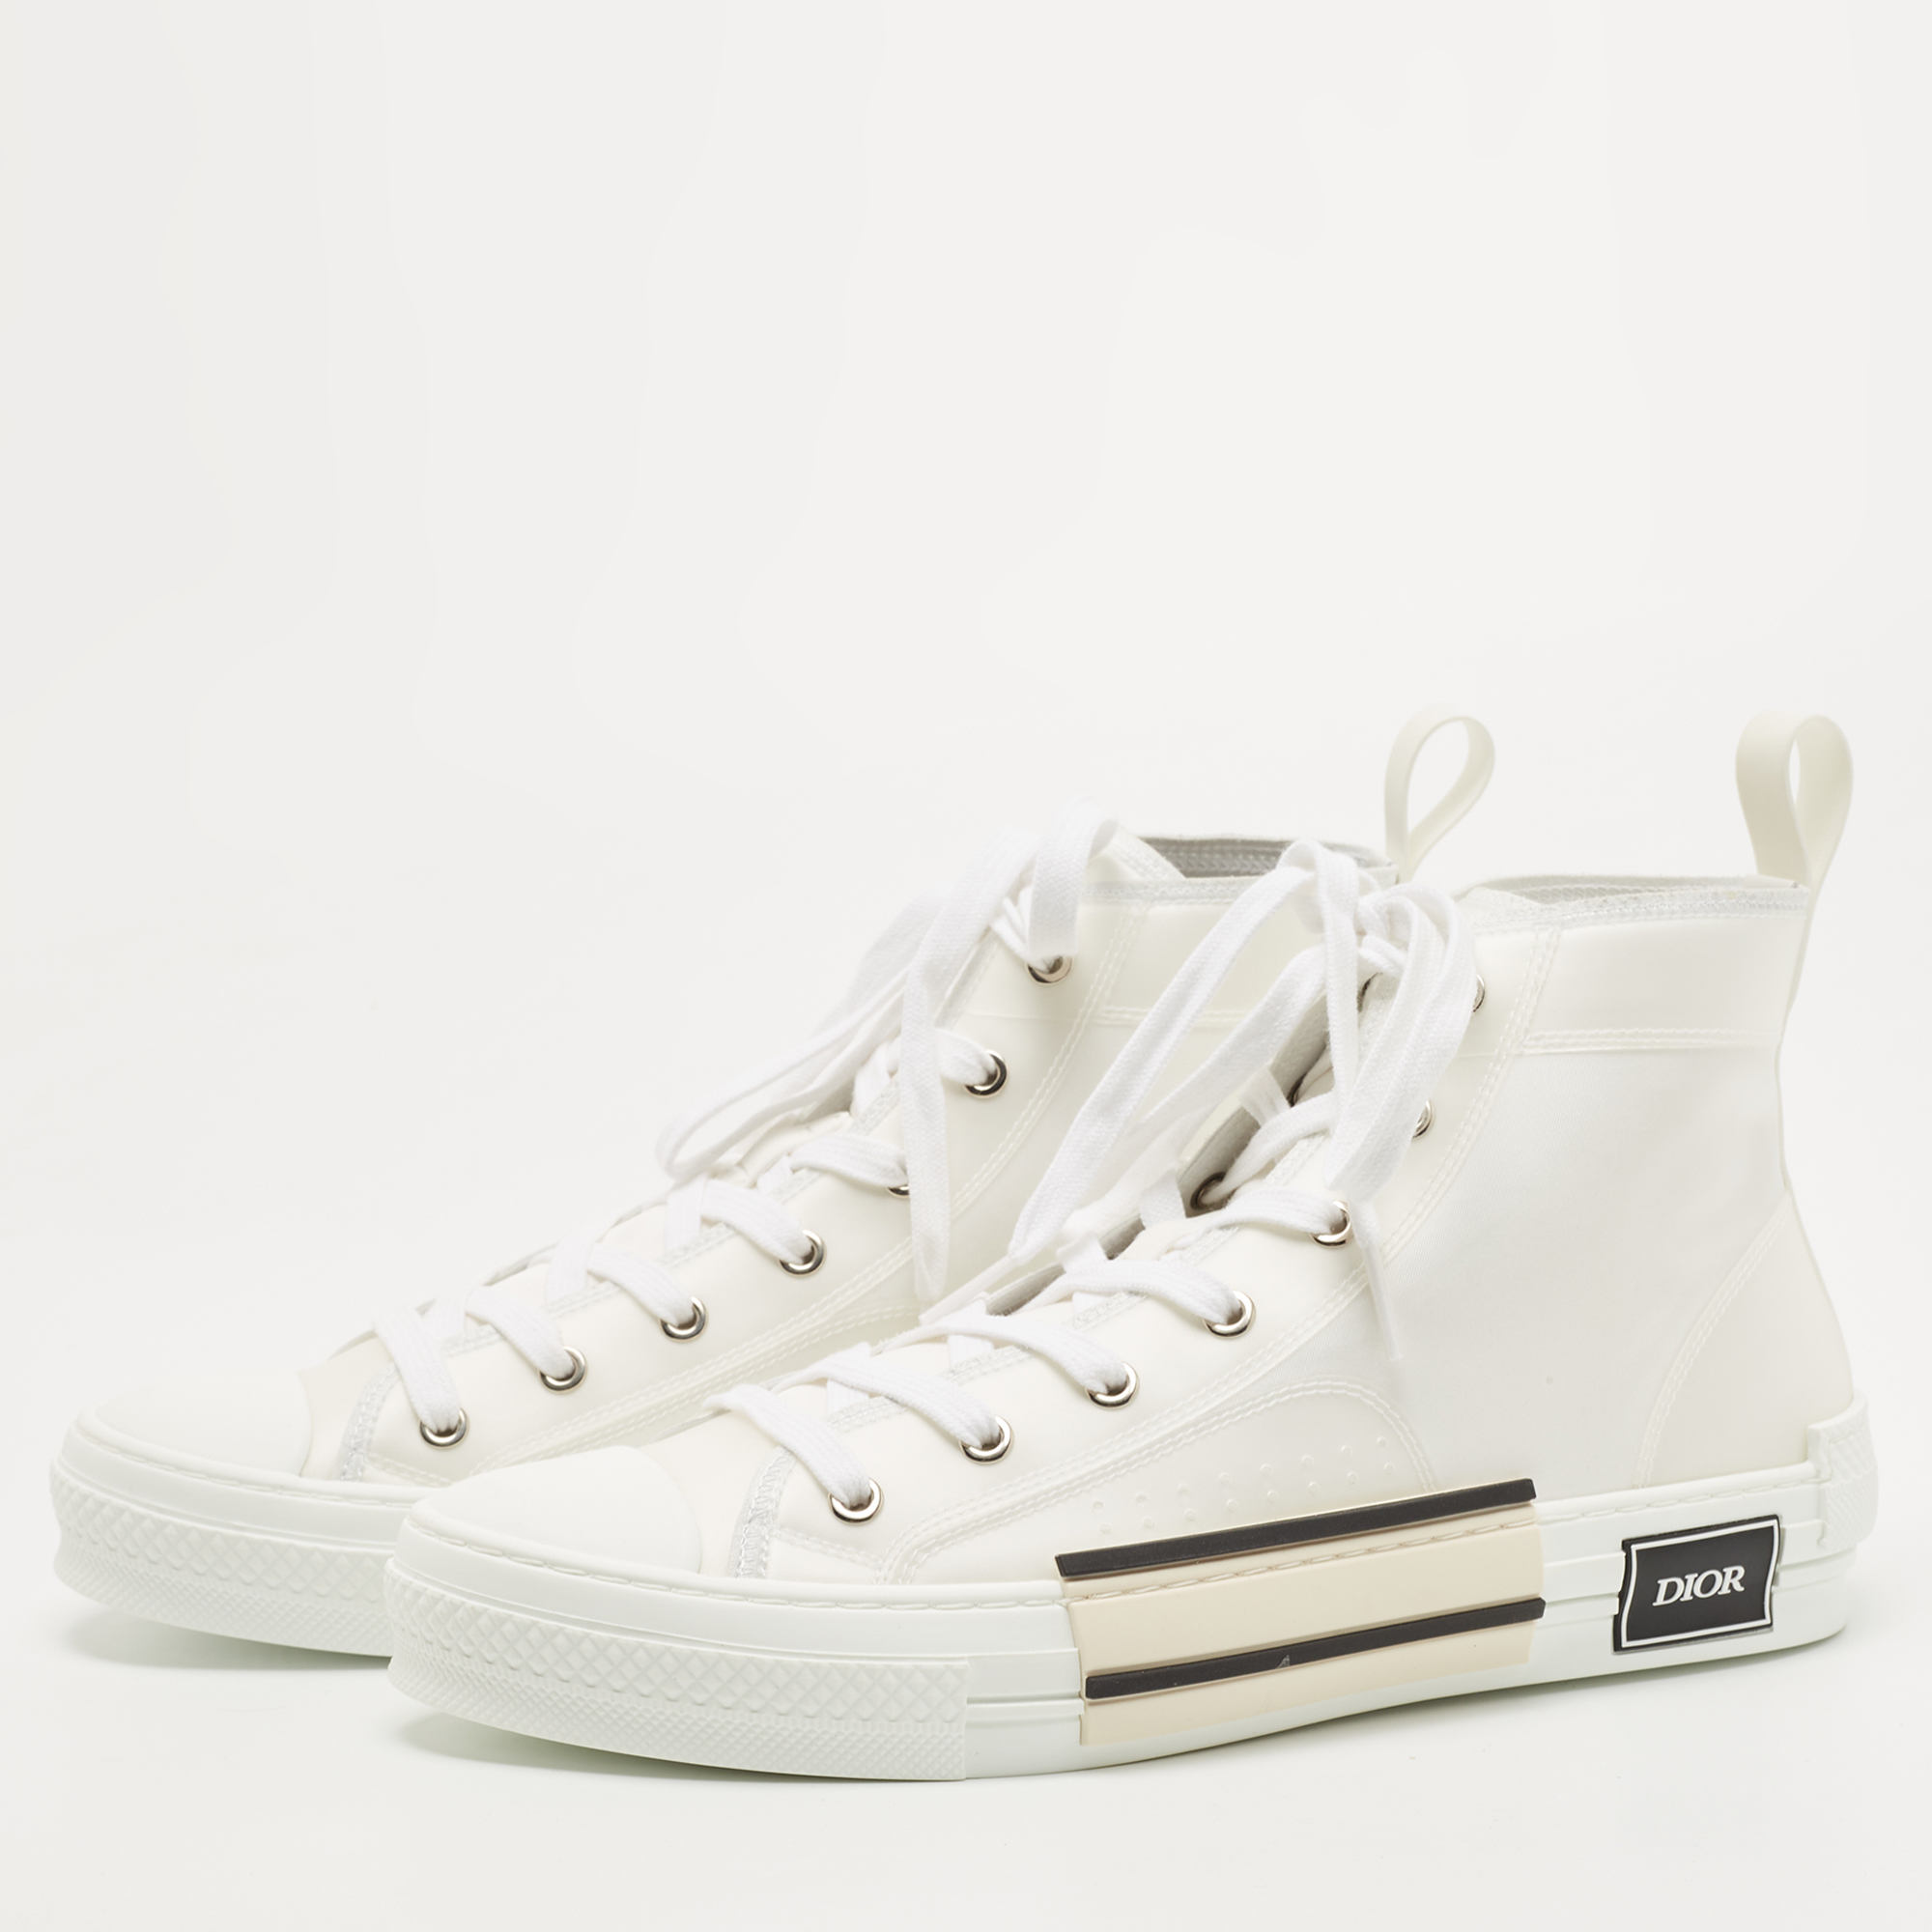 

Dior White Canvas and PVC B23 High Top Sneakers Size